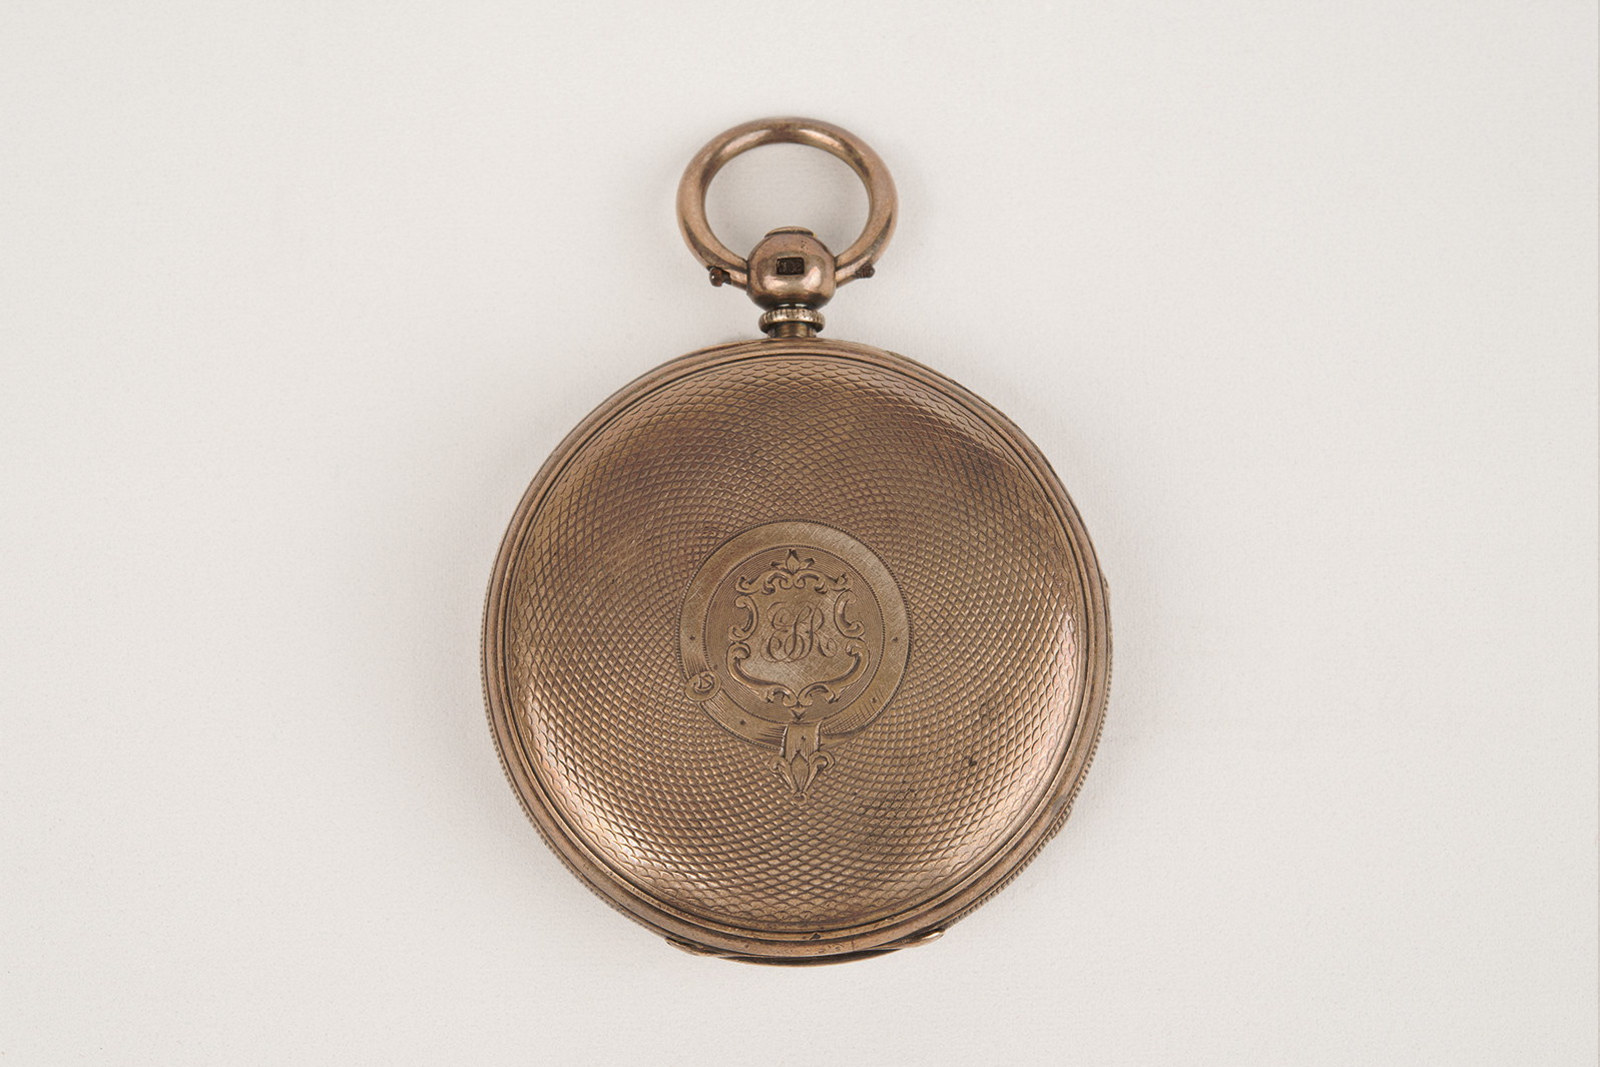 Back of an open faced silver fob watch owned by Edwin Stephen Rouse